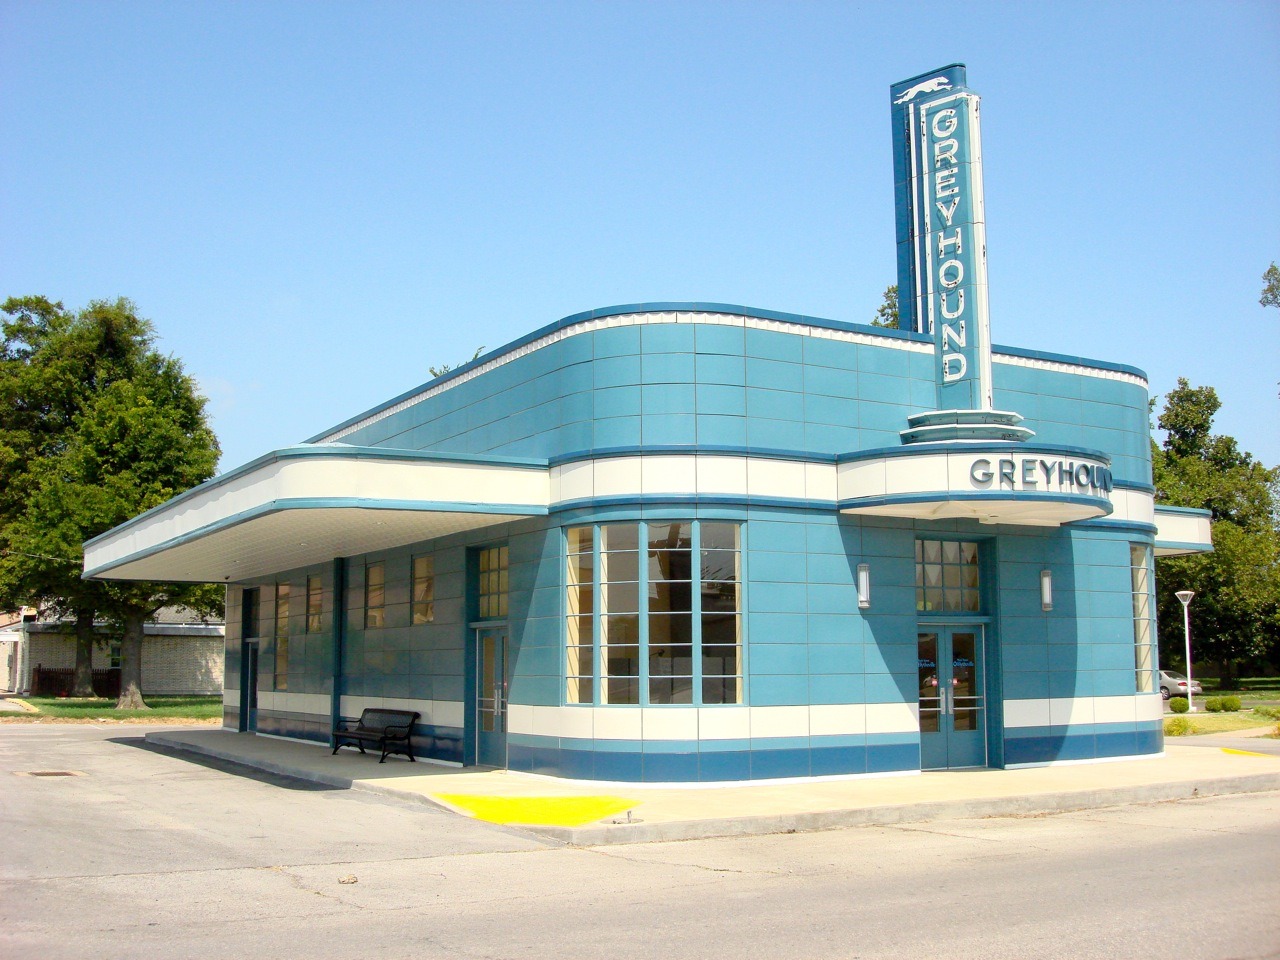 Greyhound bus station in jackson  tennessee  built in 1938